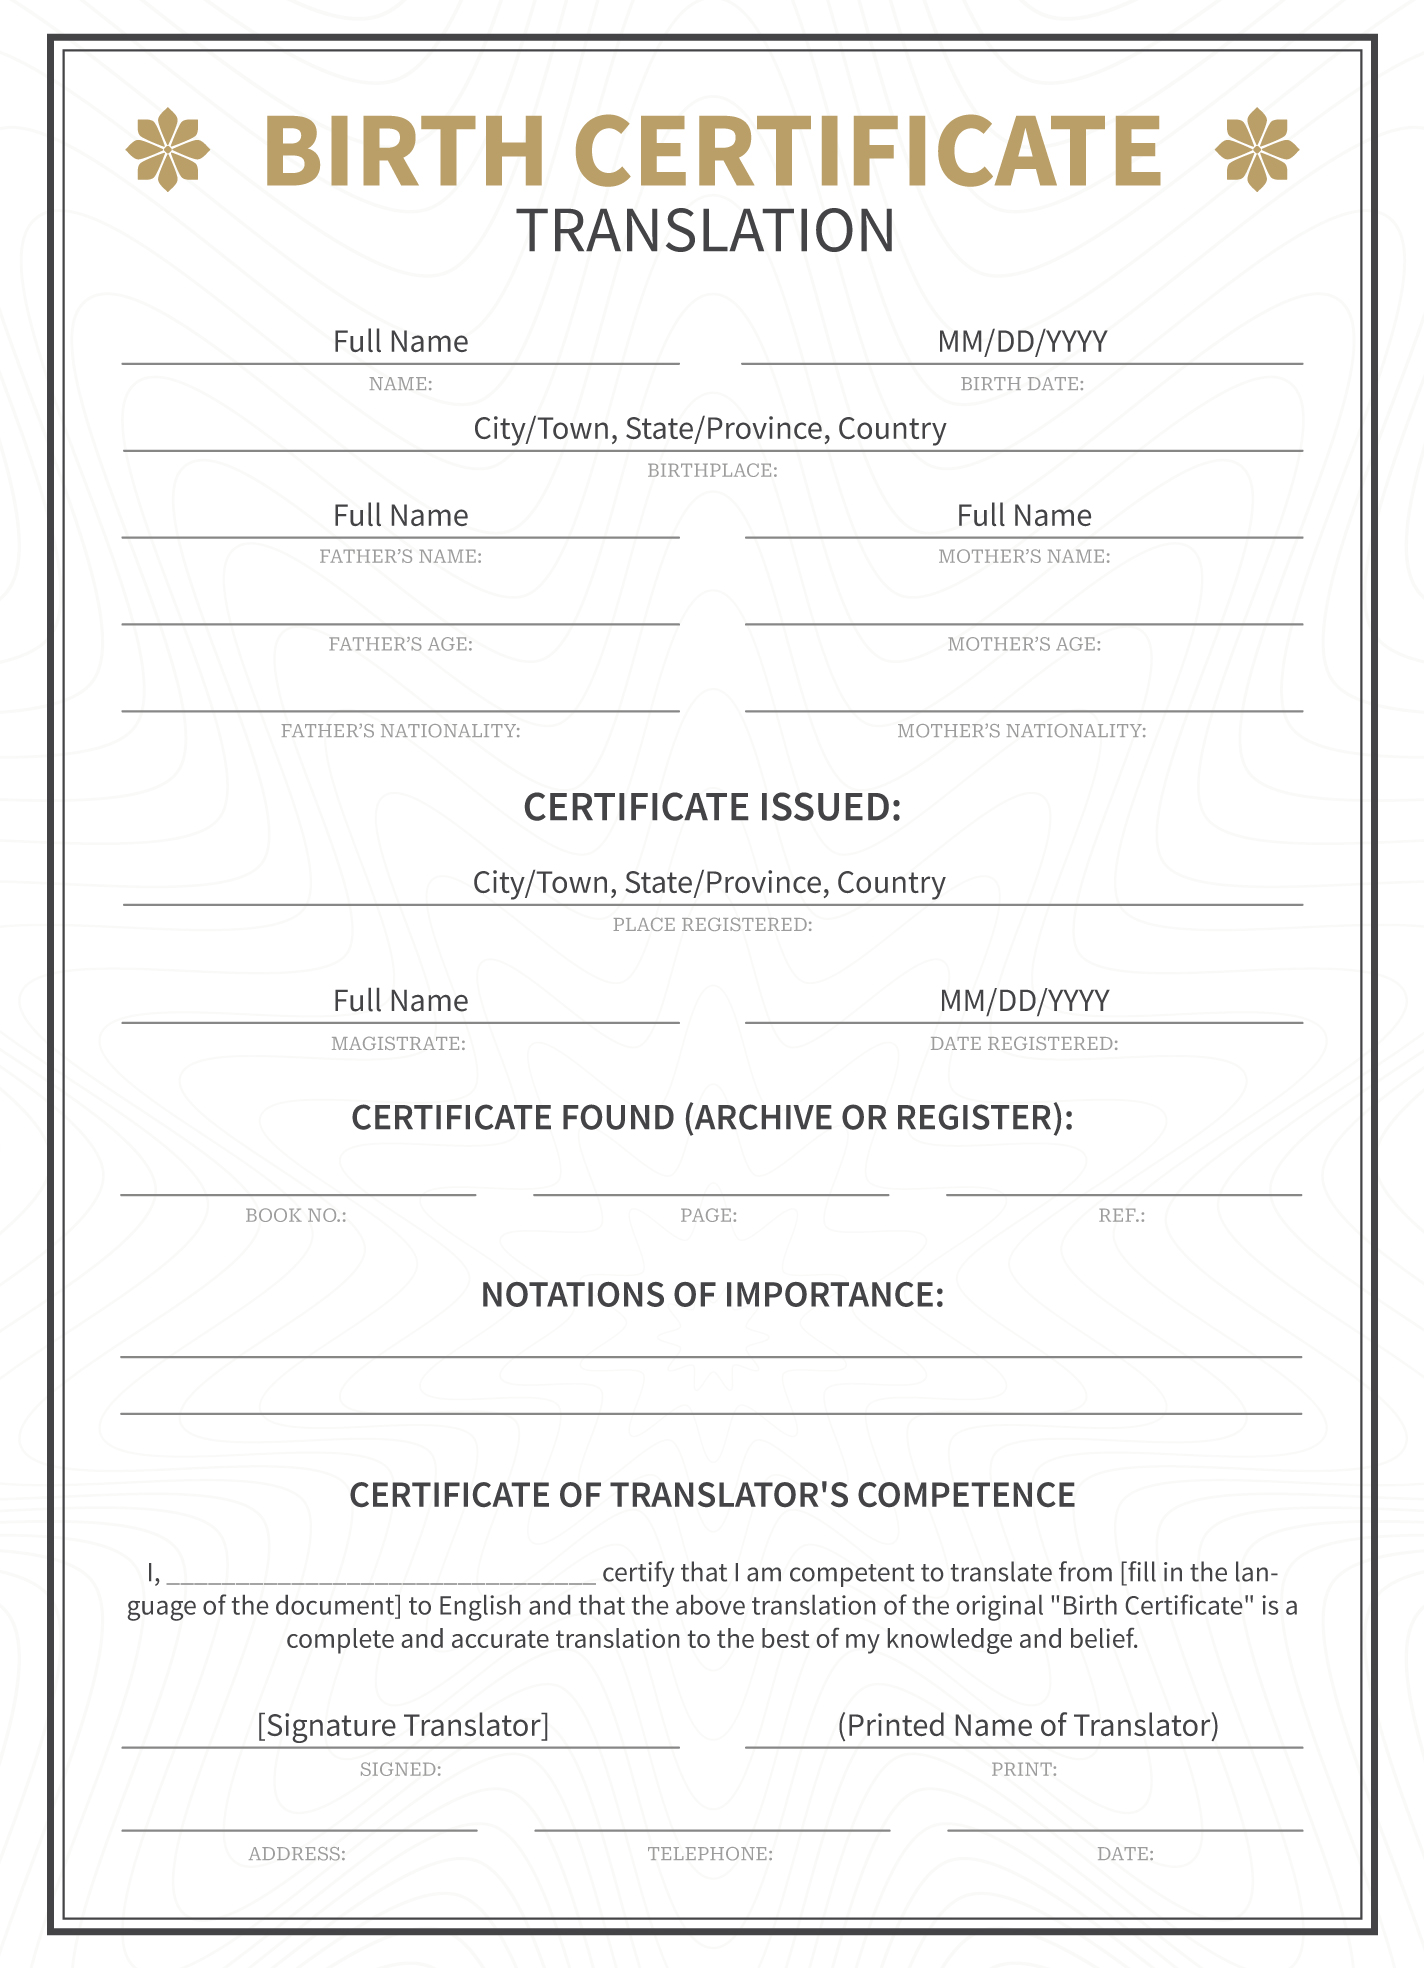 official-birth-certificate-template